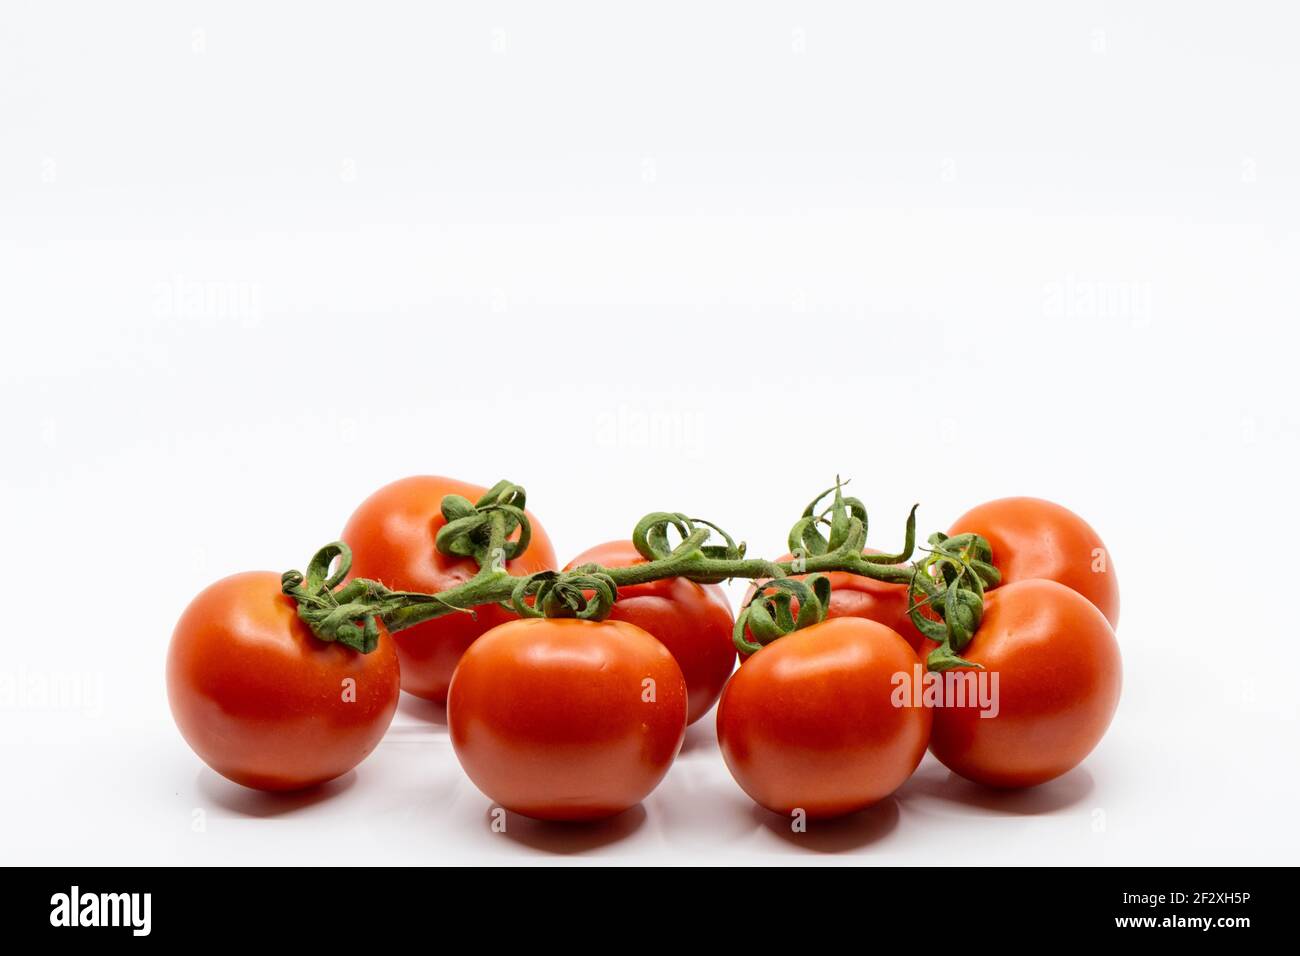 Fresh Tomatoes Isolated on White Background. Bunch of fresh, red tomatoes with green stems Stock Photo